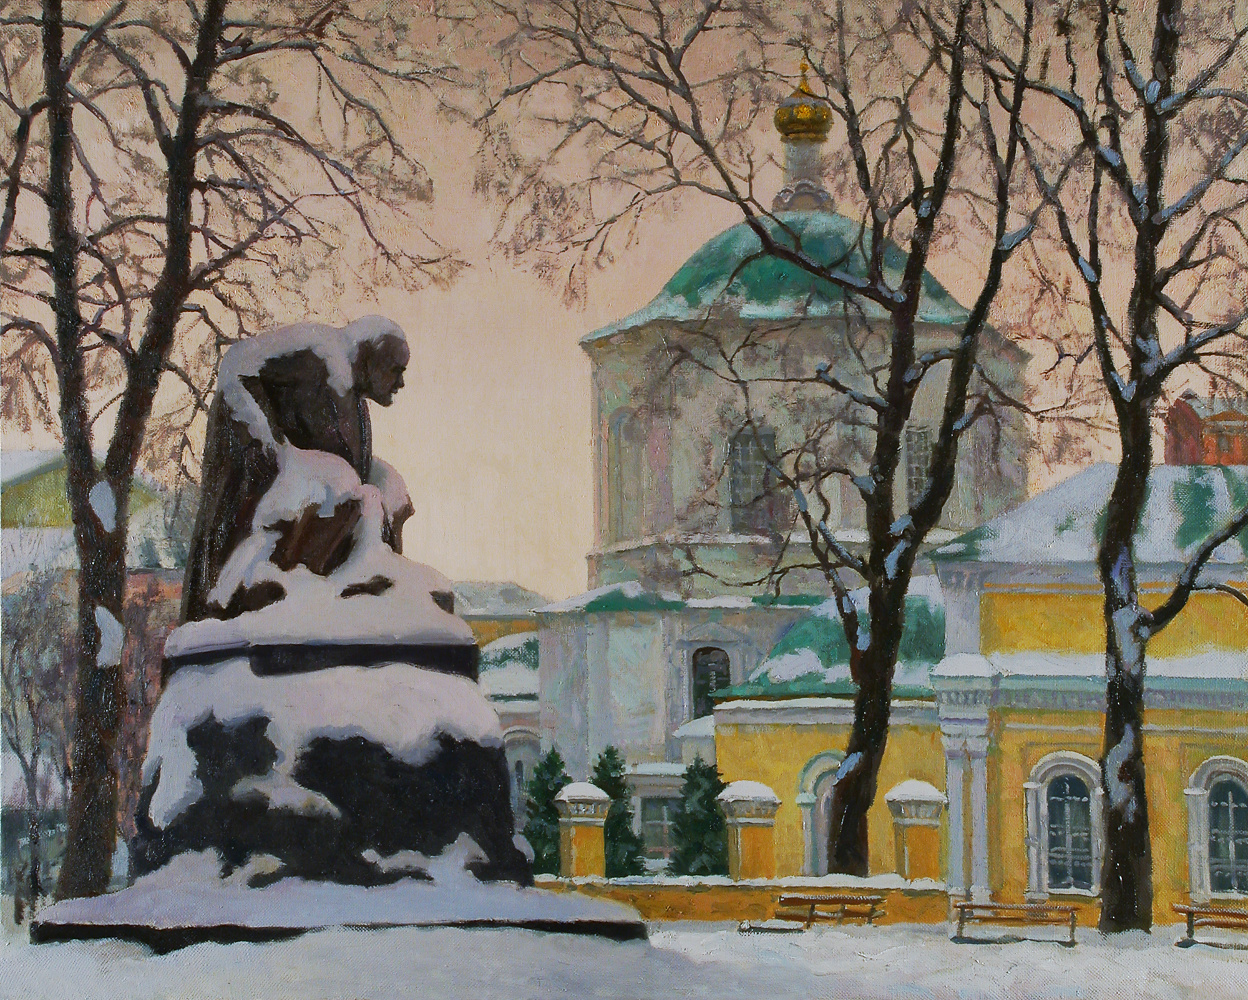 Moscow in the snow (Lenin monument)